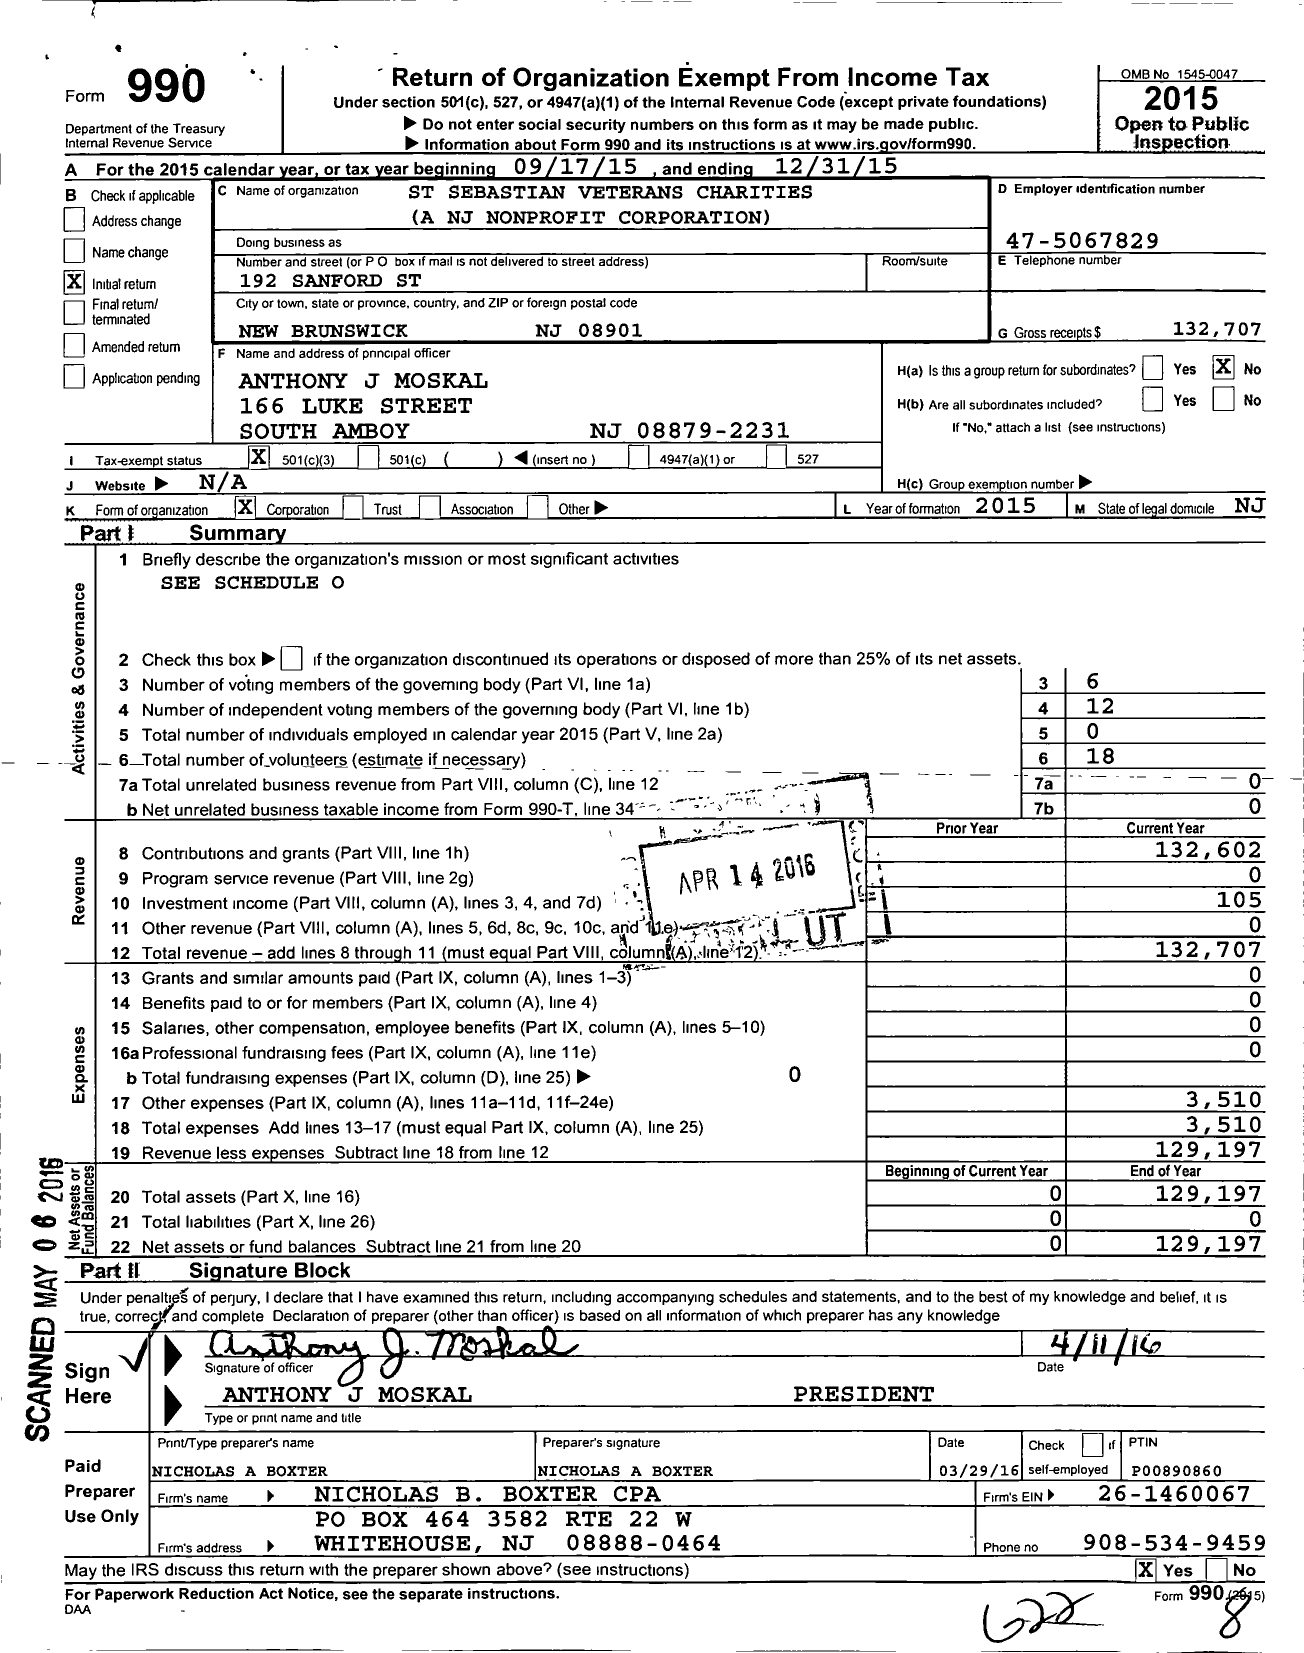 Image of first page of 2015 Form 990 for St Sebastian Veterans Charities A NJ Nonprofit Corporation